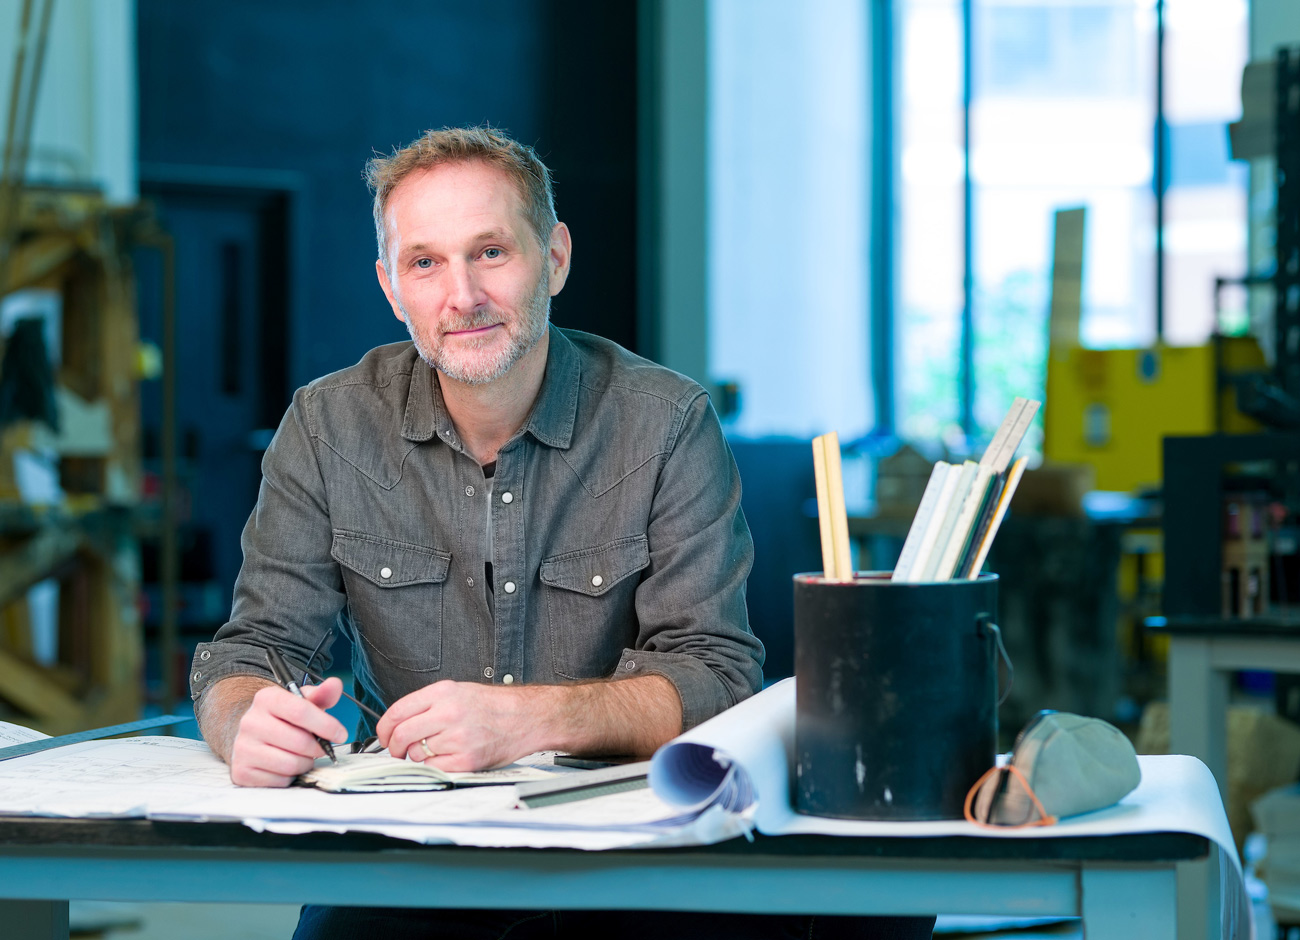 Patrick Larsen of Studio Bound sits a desk with a pen and idea book in hand